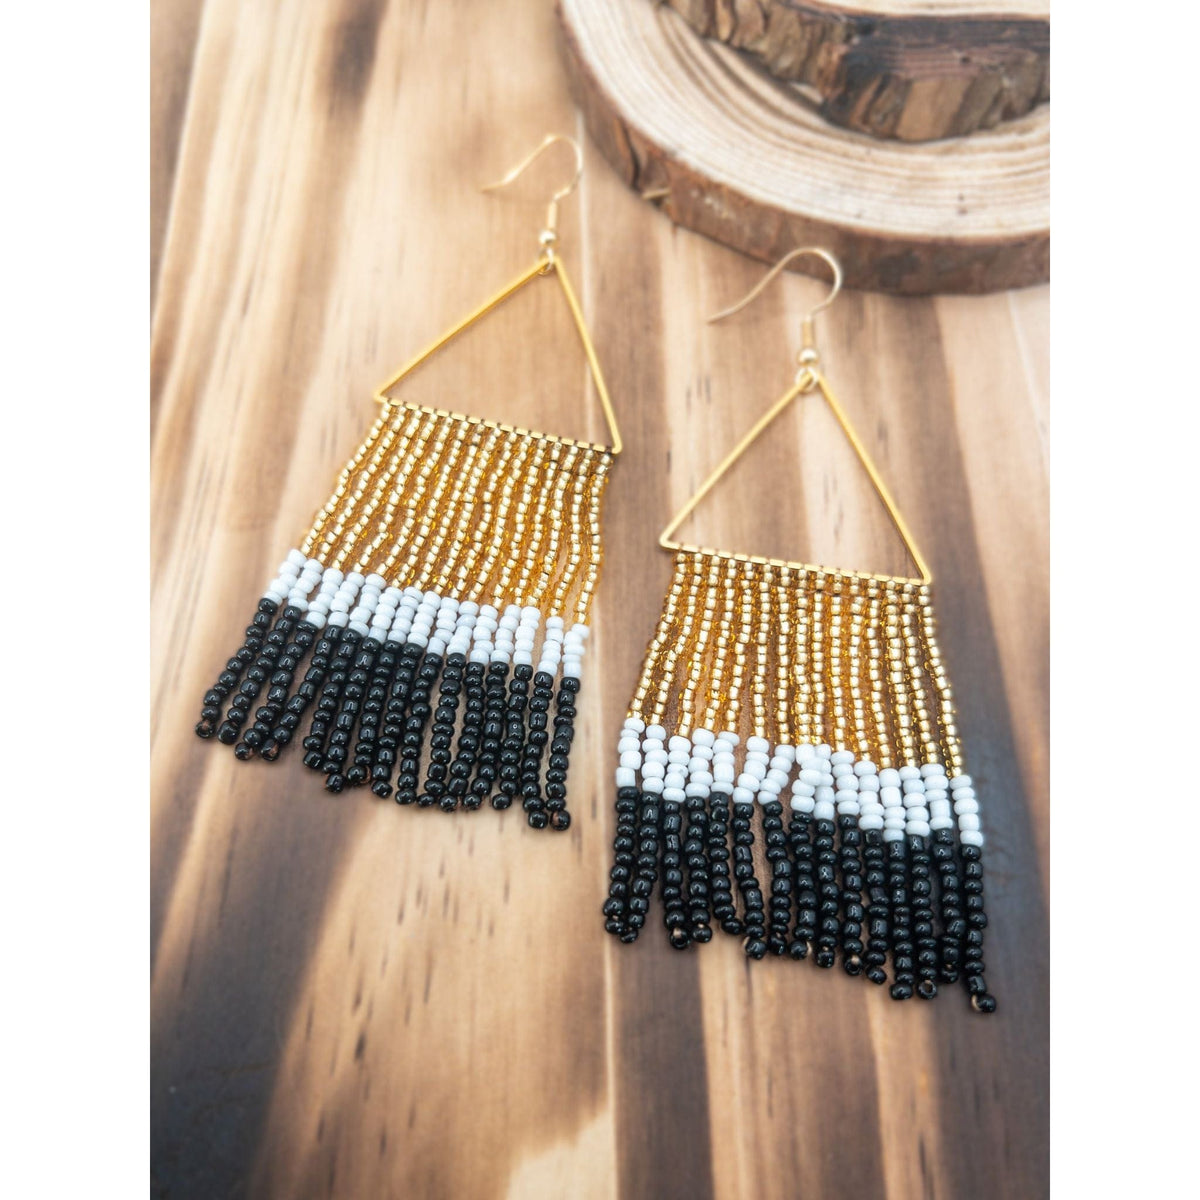 Time Square Beaded Earrings Earrings TheFringeCultureCollective